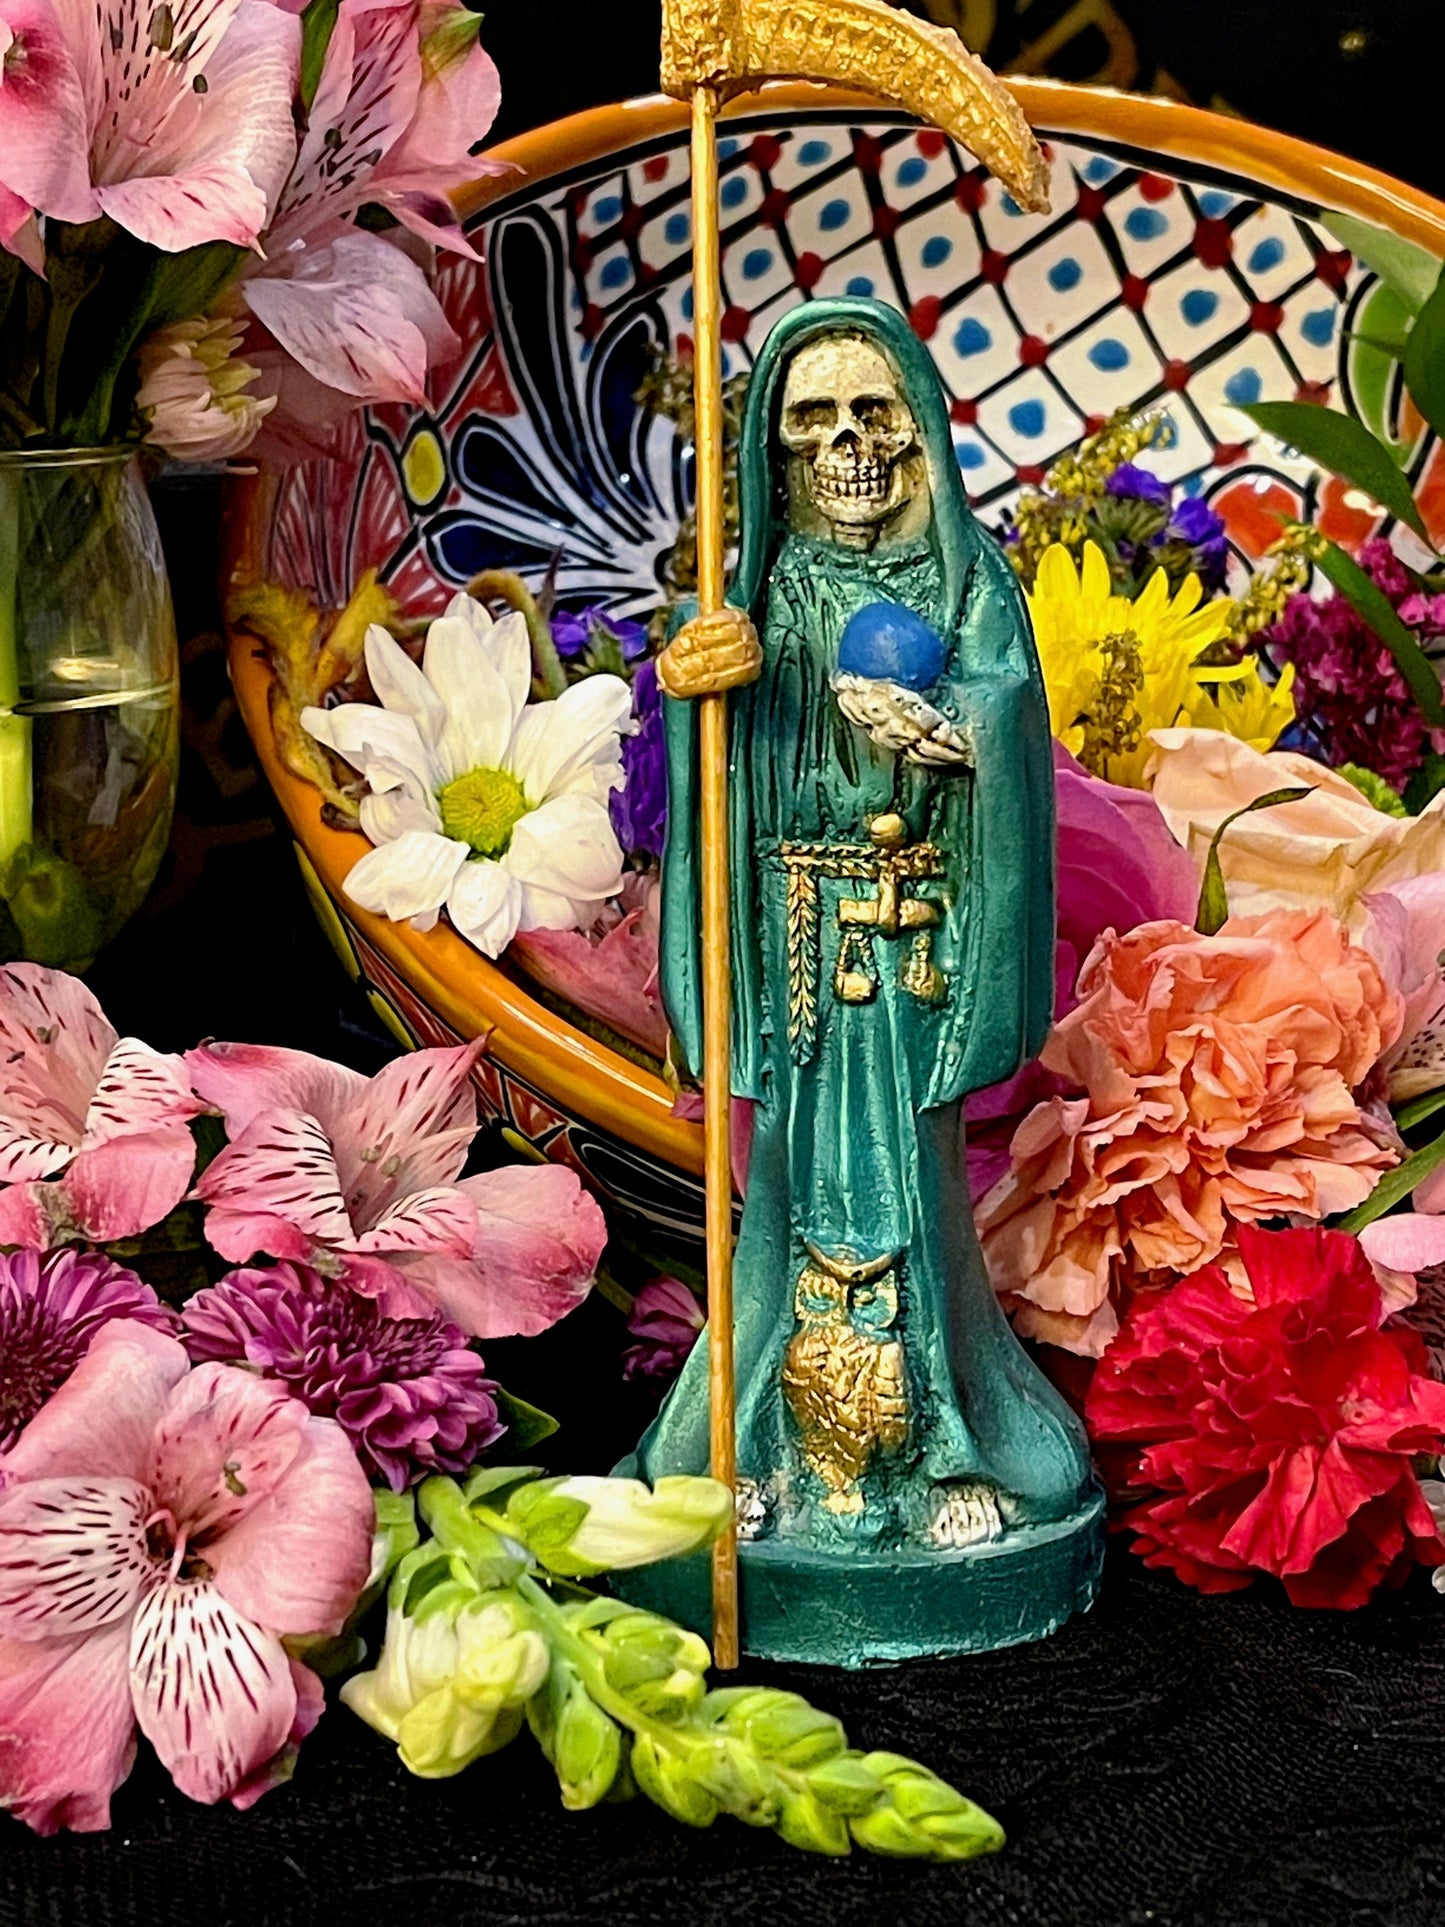 Santa Muerte Verde / Green Statue with Dress + Baptized + Fixed + Made in Mexico + 24K Gold Leaf on Scythe